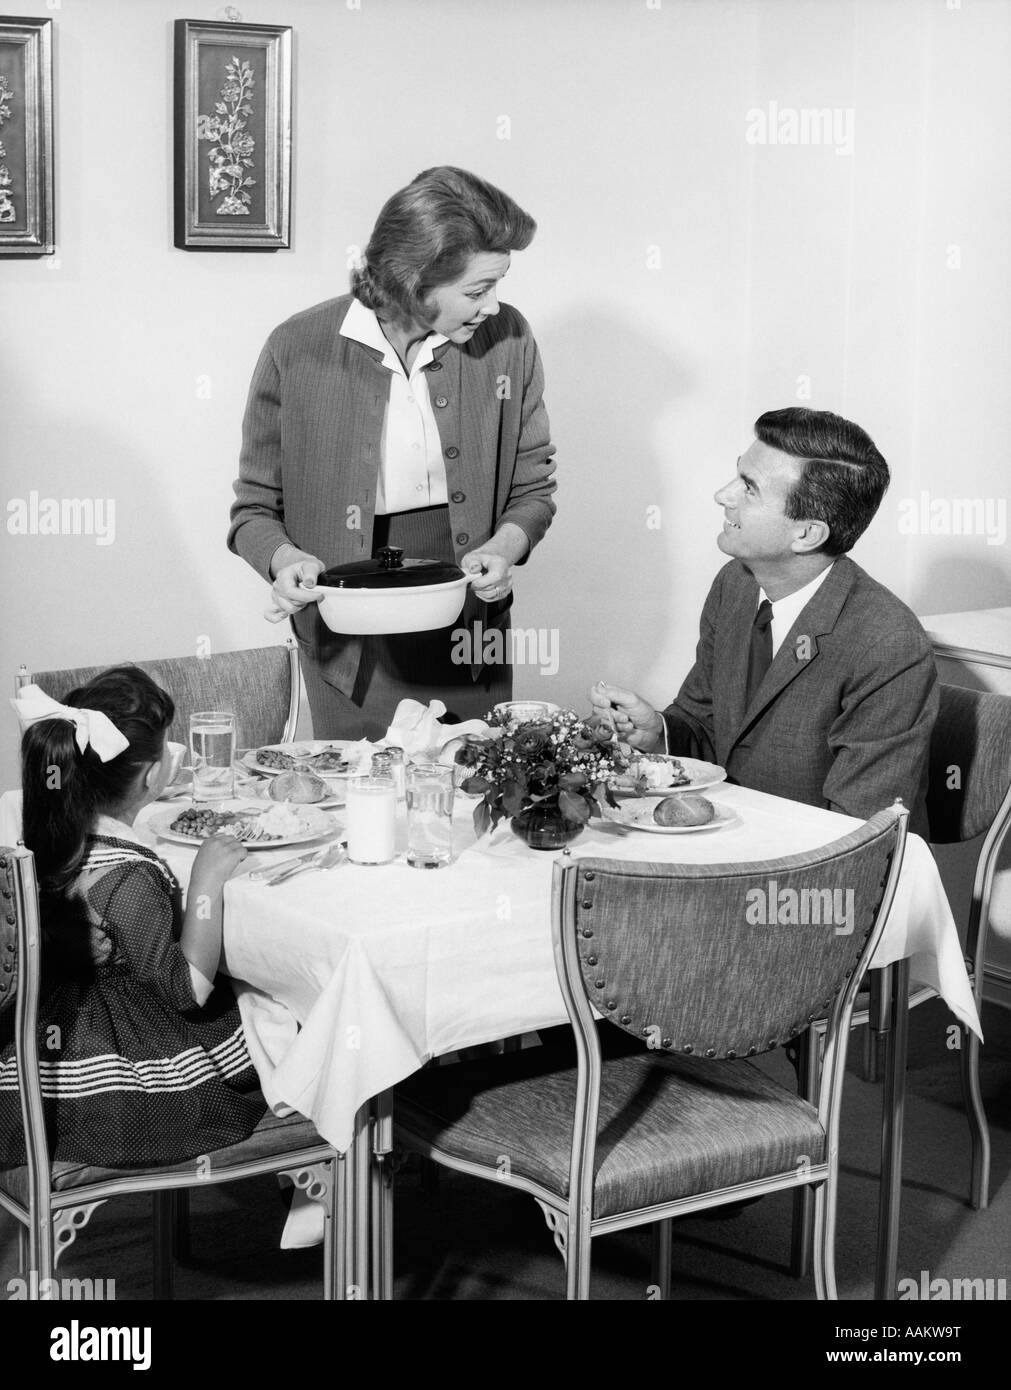 1950s 1960s FAMILY OF THREE AT DINING ROOM TABLE AT DINNER TALKING WITH WIFE STANDING PUTTING CASSEROLE DISH ON TABLE Stock Photo